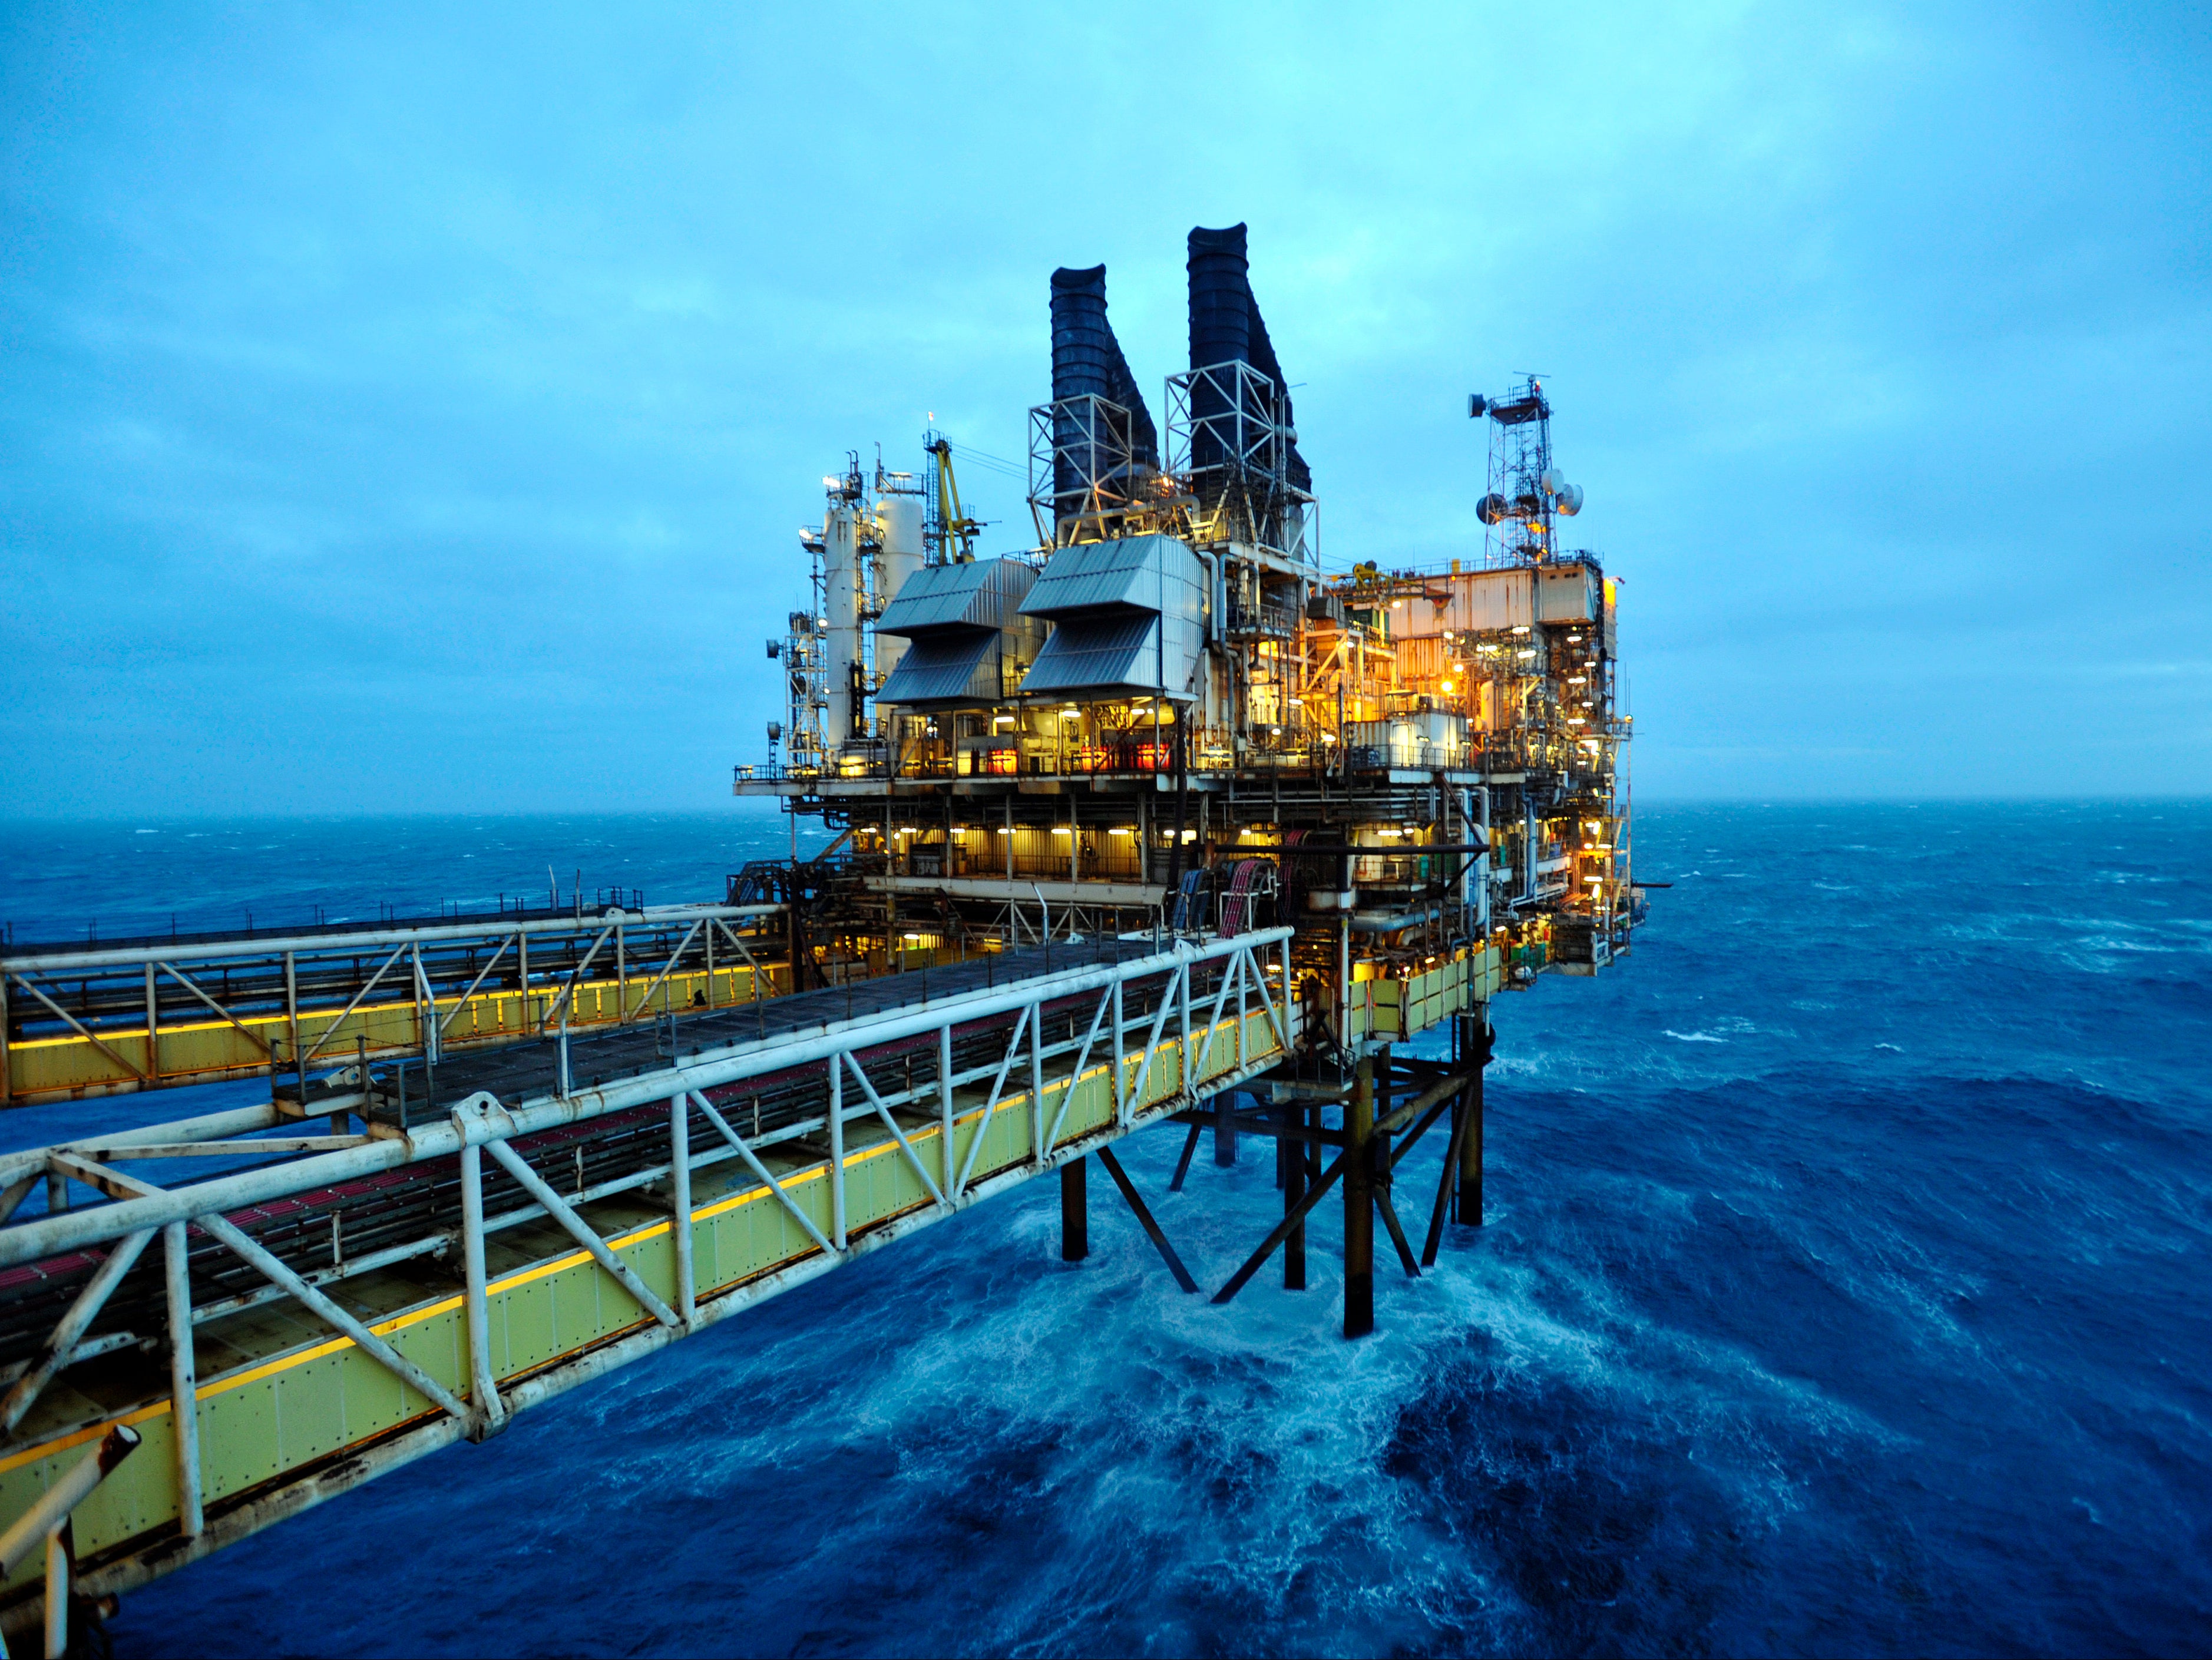 The Cambo oil field would operate in the North Sea until 2050